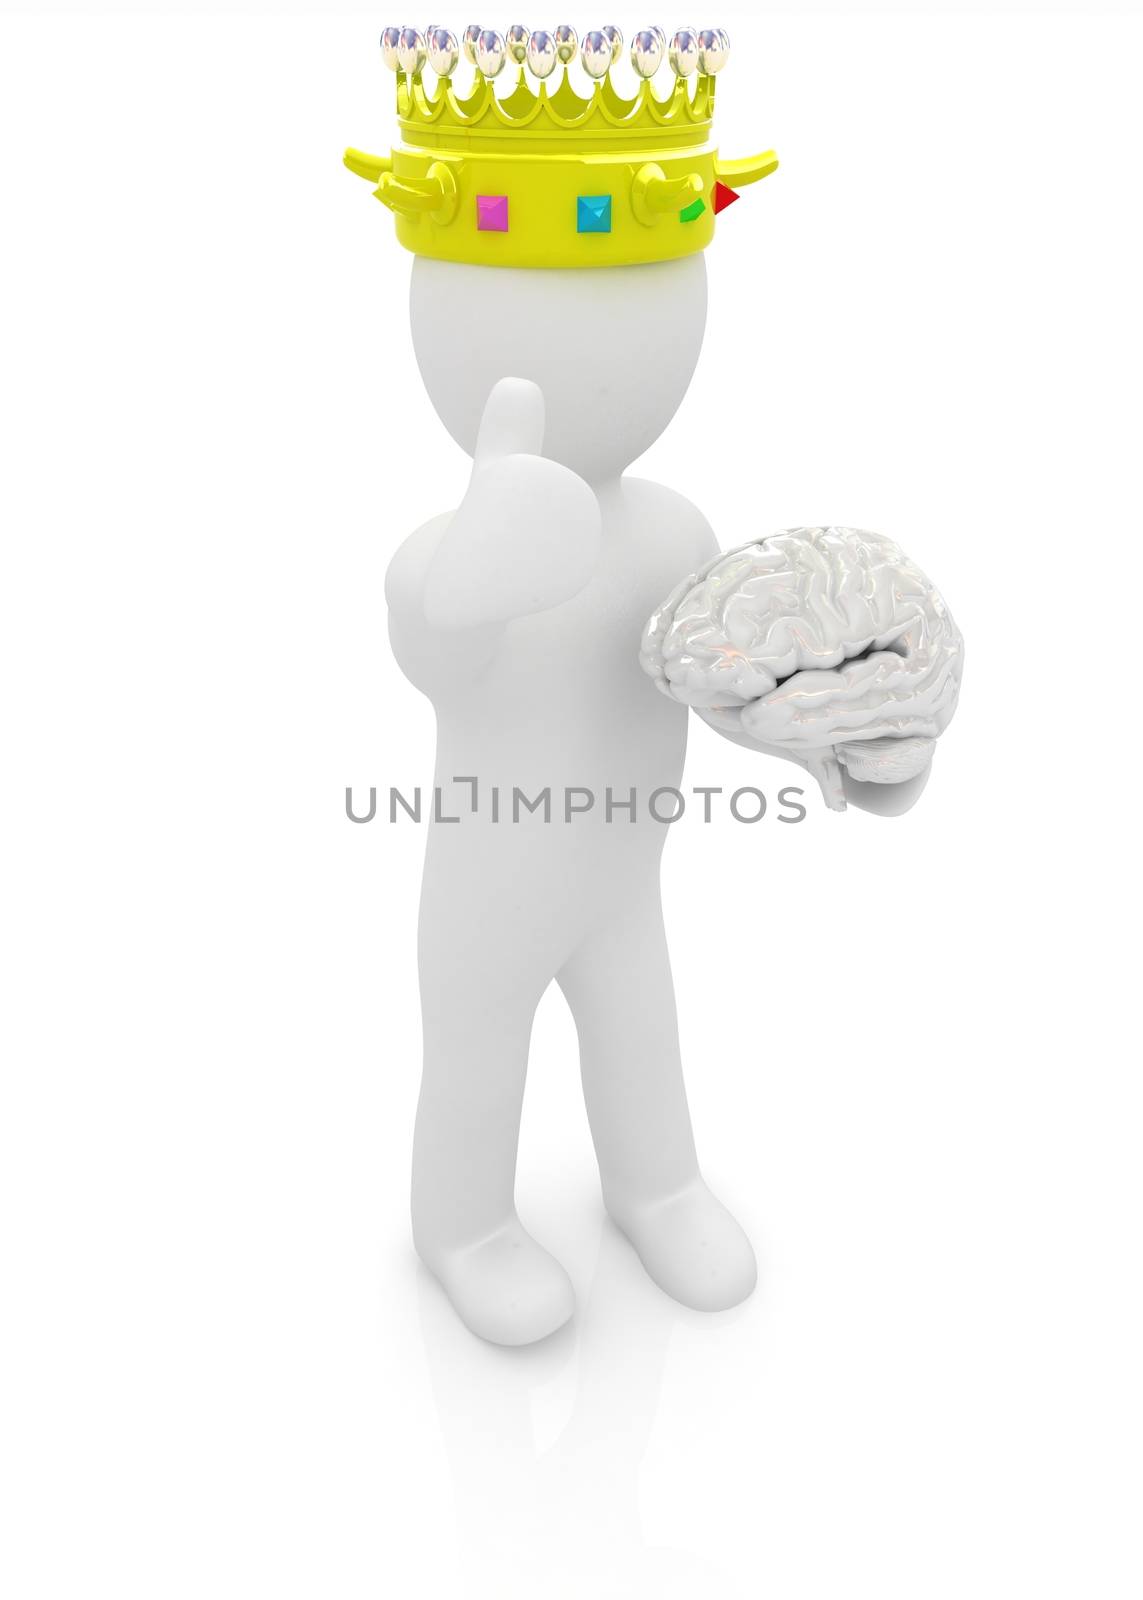 3d people - man, person with a golden crown. King with brain